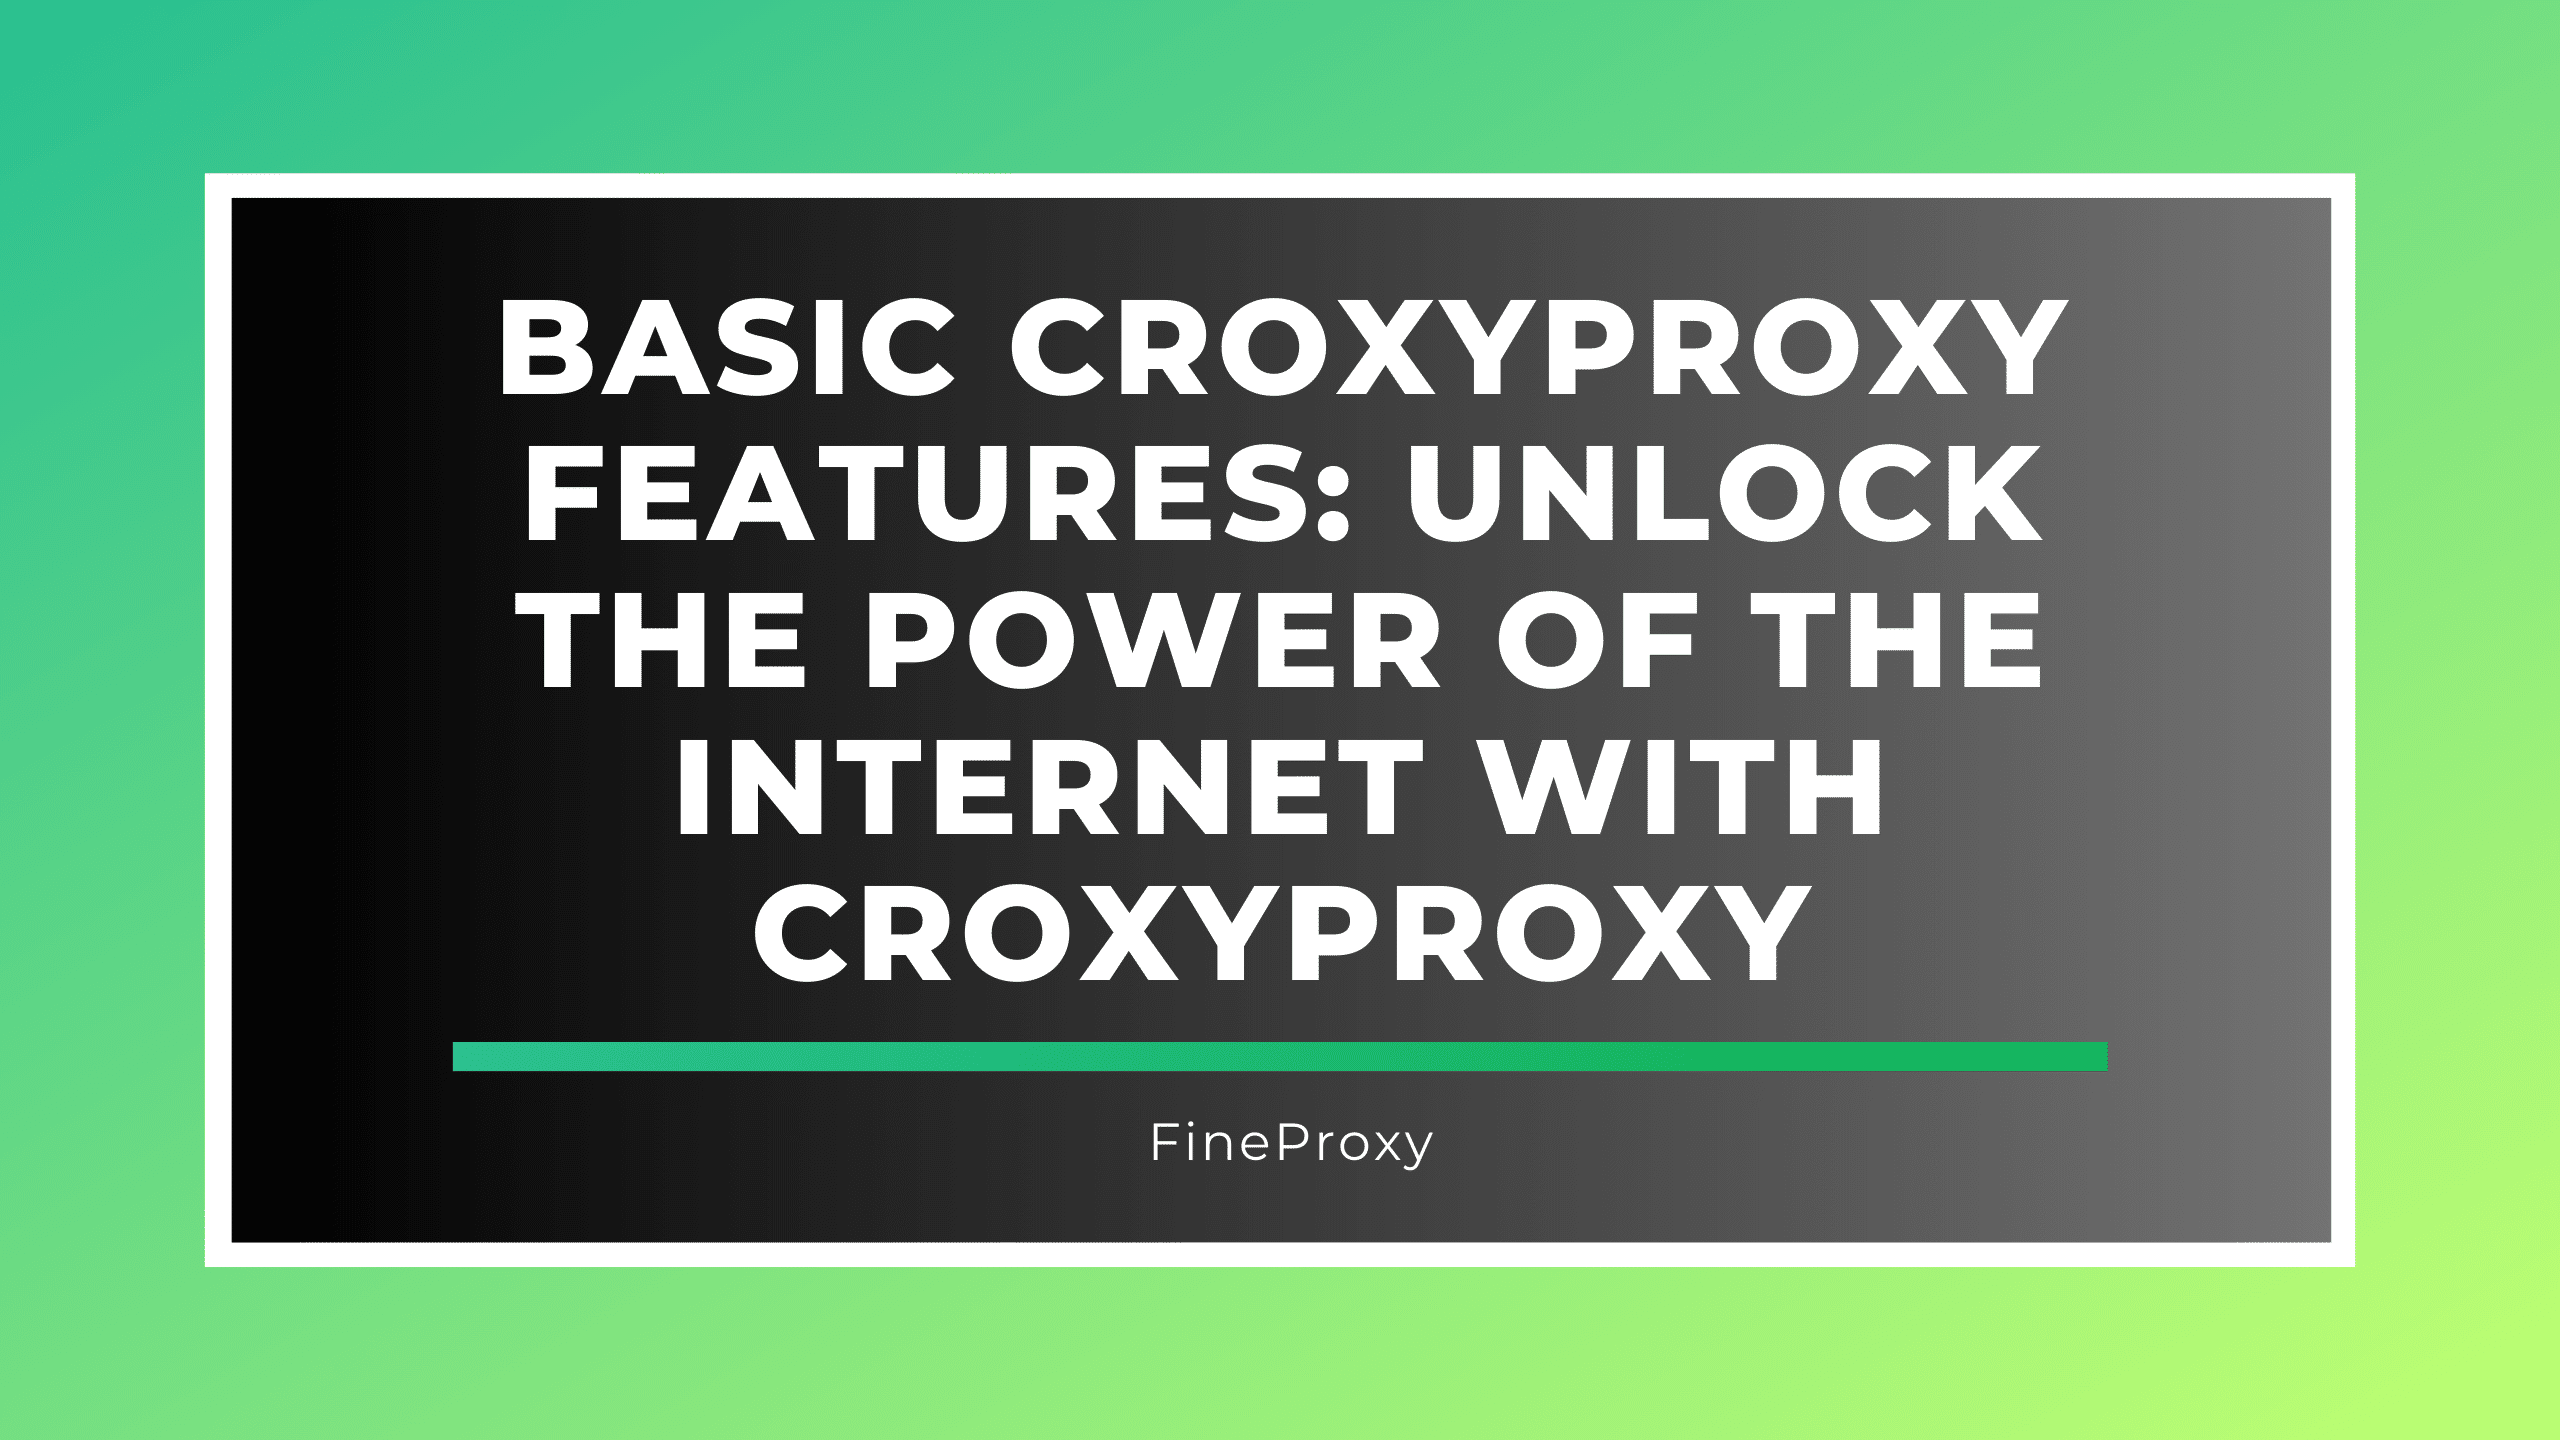 Basic CroxyProxy features: Unlock the Power of the Internet with CroxyProxy